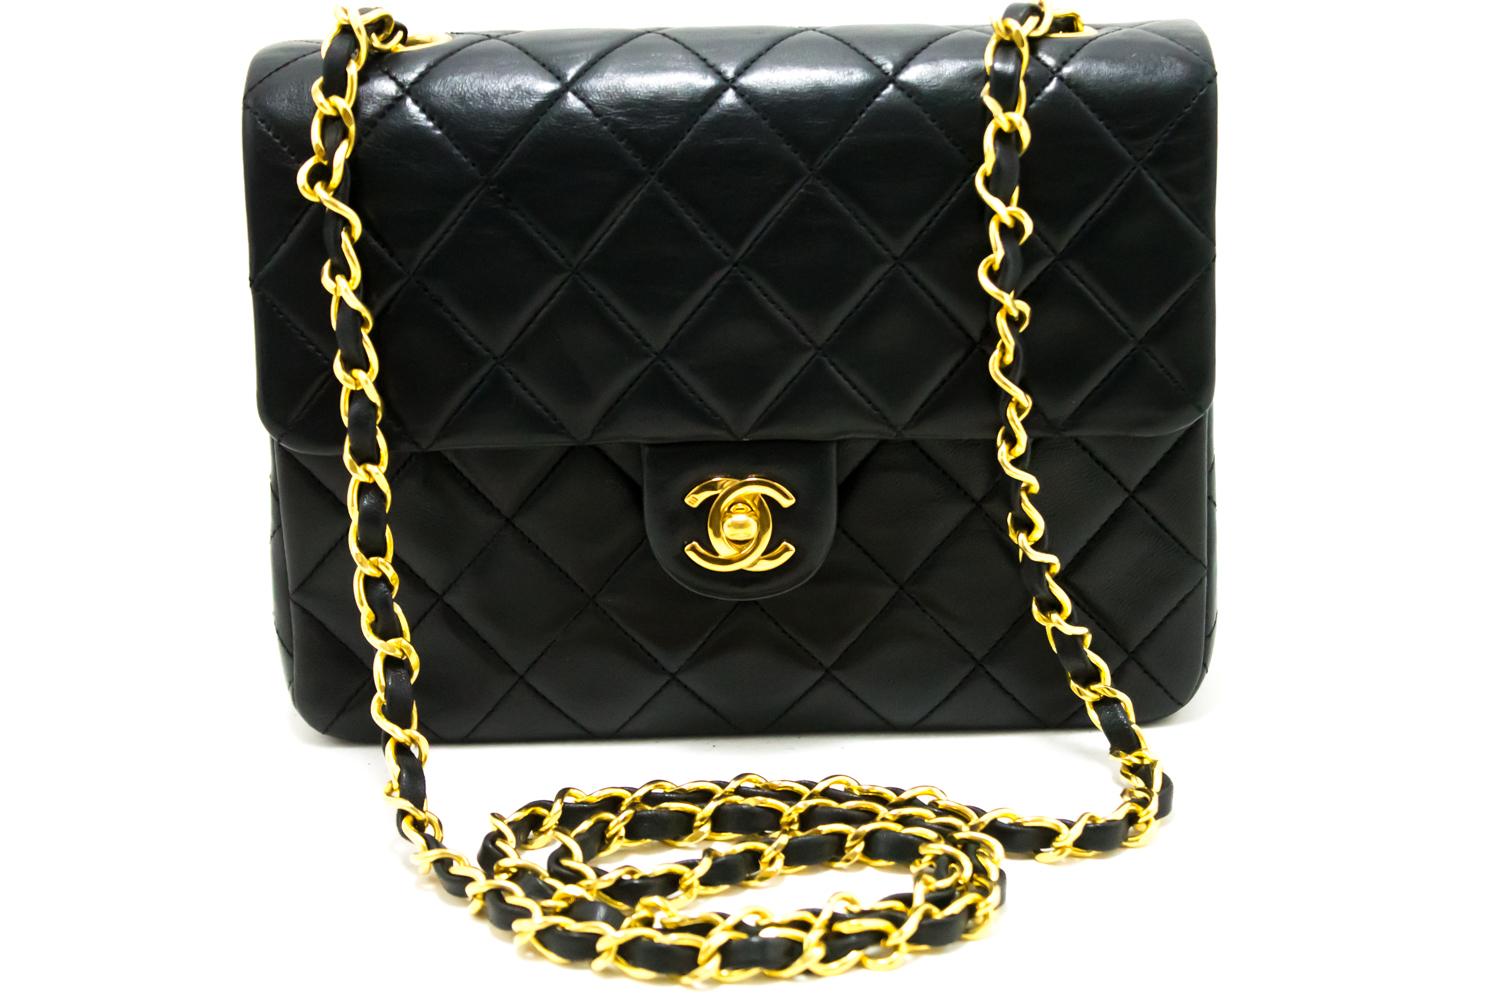 An authentic CHANEL Mini Square Small Chain Shoulder Bag Crossbody Black Quilt. The color is Black. The outside material is Leather. The pattern is Solid.
Conditions & Ratings
Outside material: Lambskin
Color: Black
Closure: Turn Lock
Hardware and